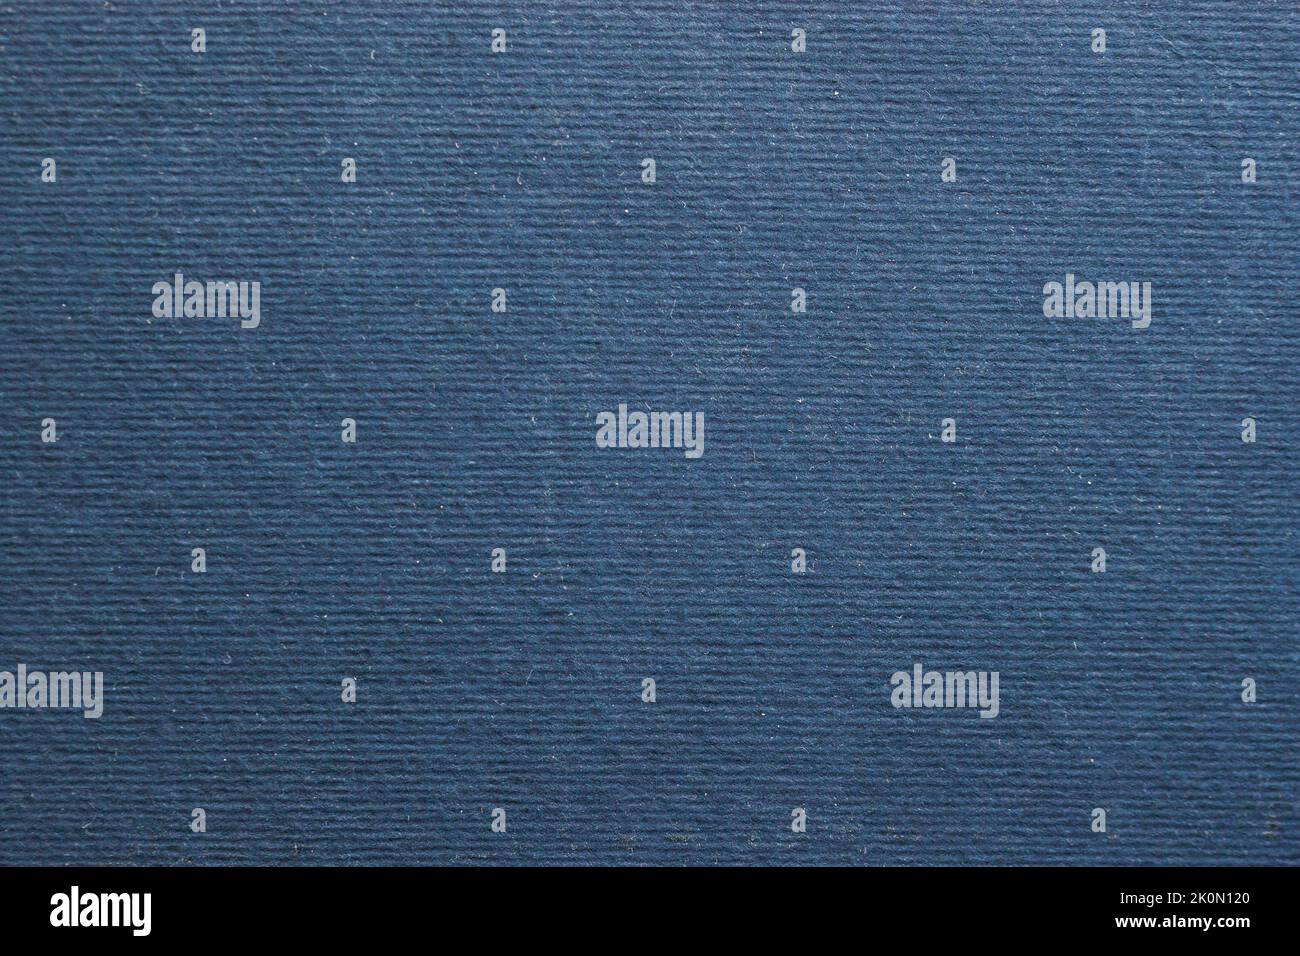 Canvas texture with horizontal lines, dark blue color. Background Stock Photo